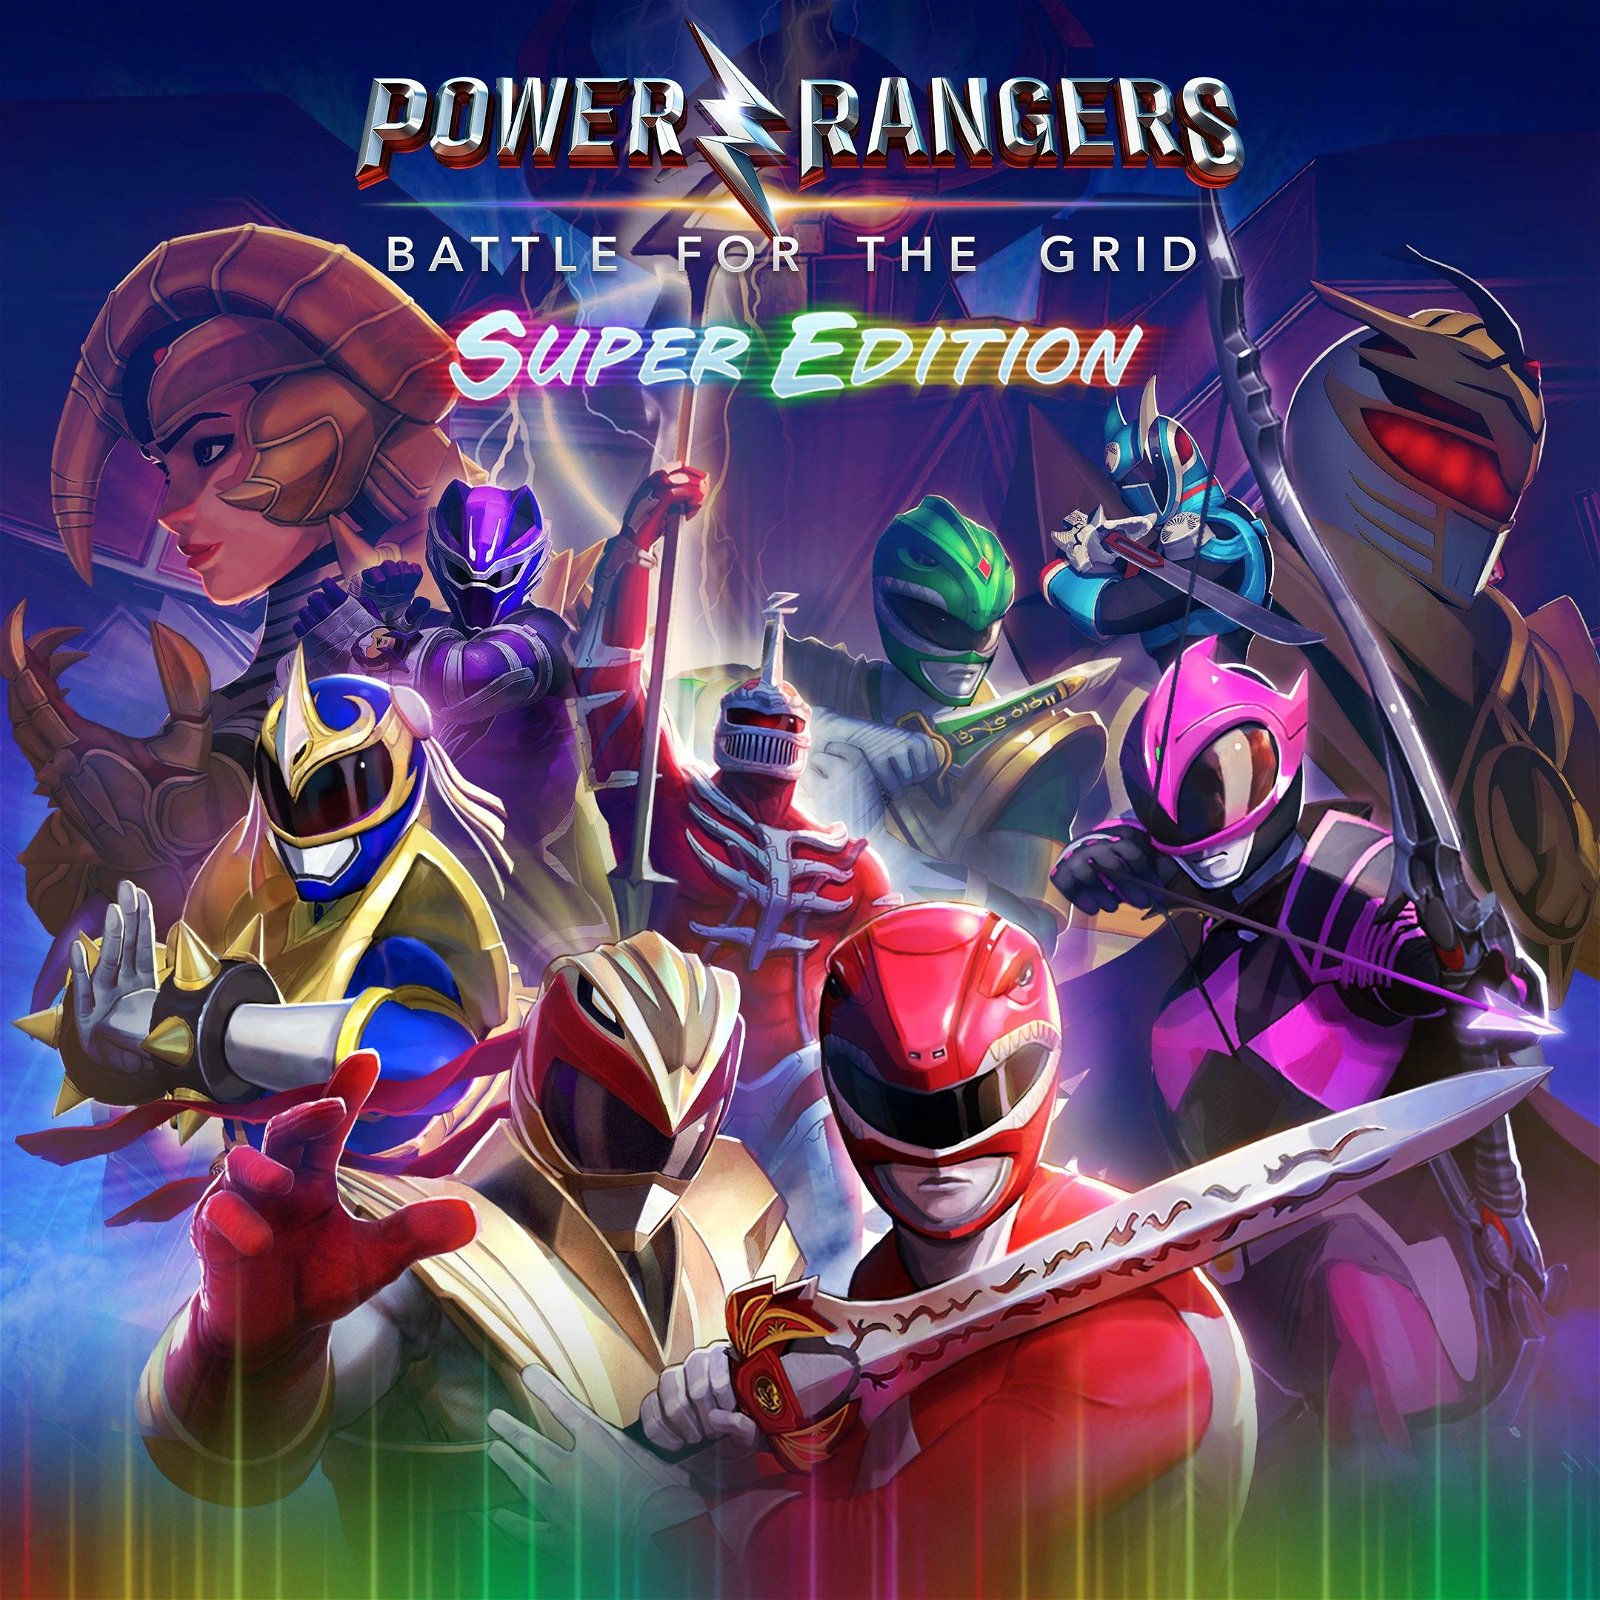 Image of Power Rangers: Battle for the Grid Super Edition